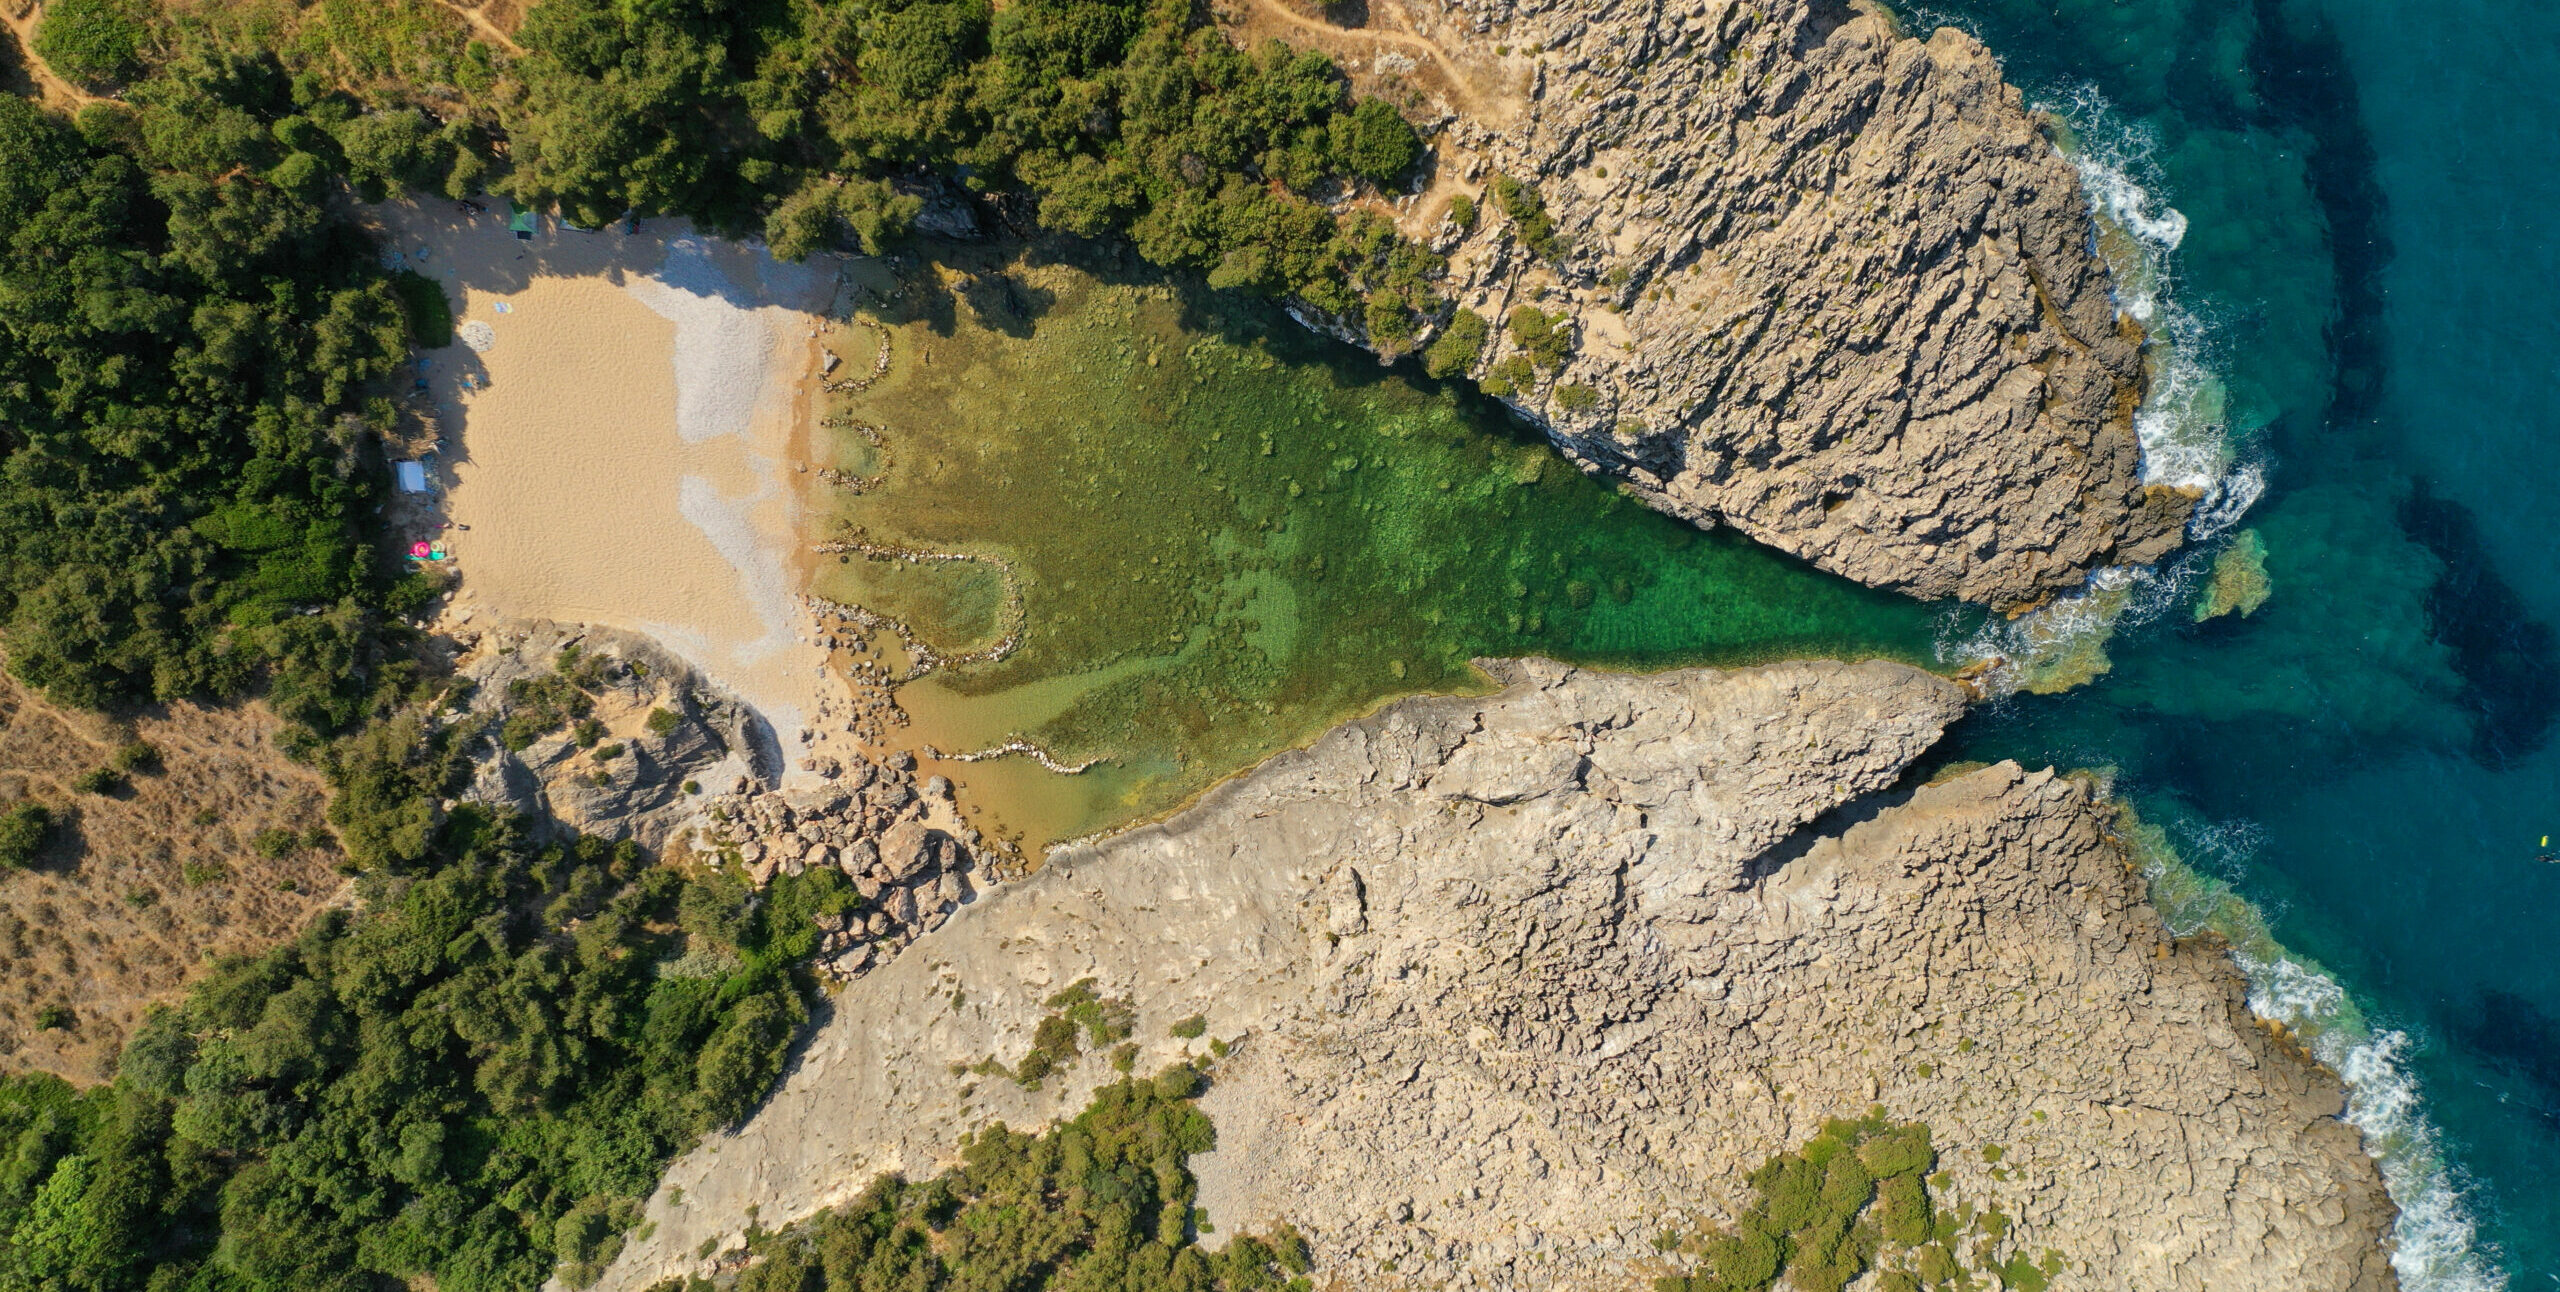 Glossa: The natural swimming pool in the Peloponnese that is eye-catching